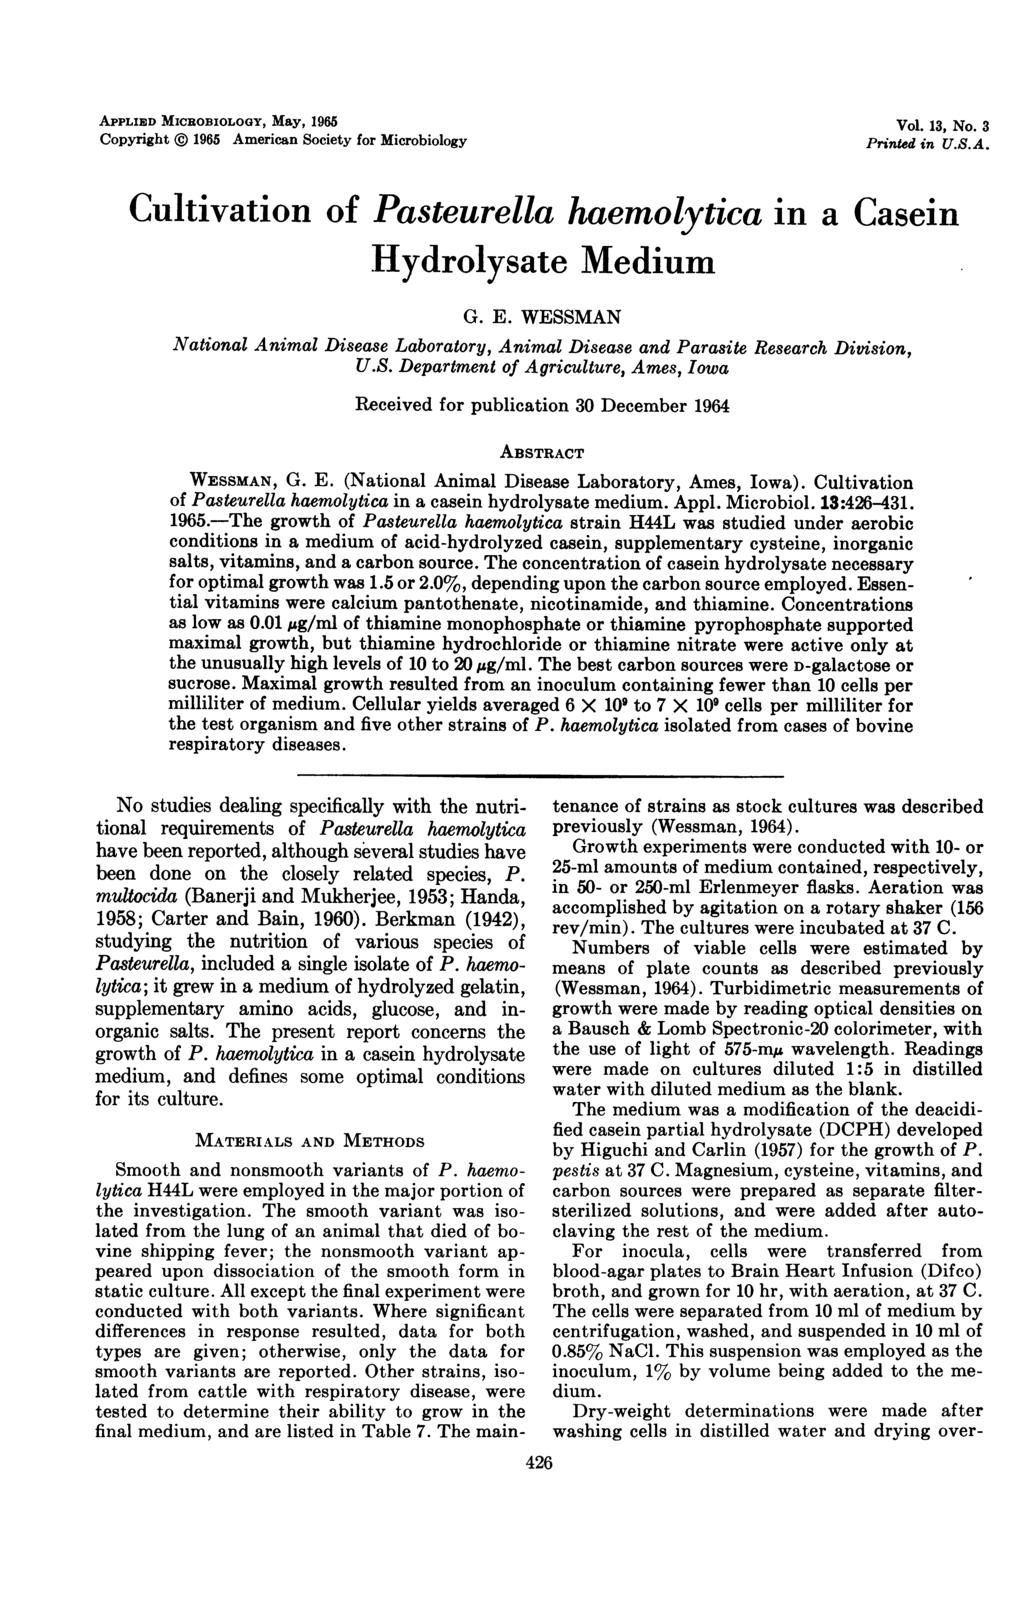 APPLIED MICROBIOLOGY, May, 1965 Copyright @ 1965 American Society for Microbiology Vol. 13, NO. 3 Printed in U.S.A. Cultivation of Pasteurella haemolytica in a Casein Hydrolysate Medium G. E.